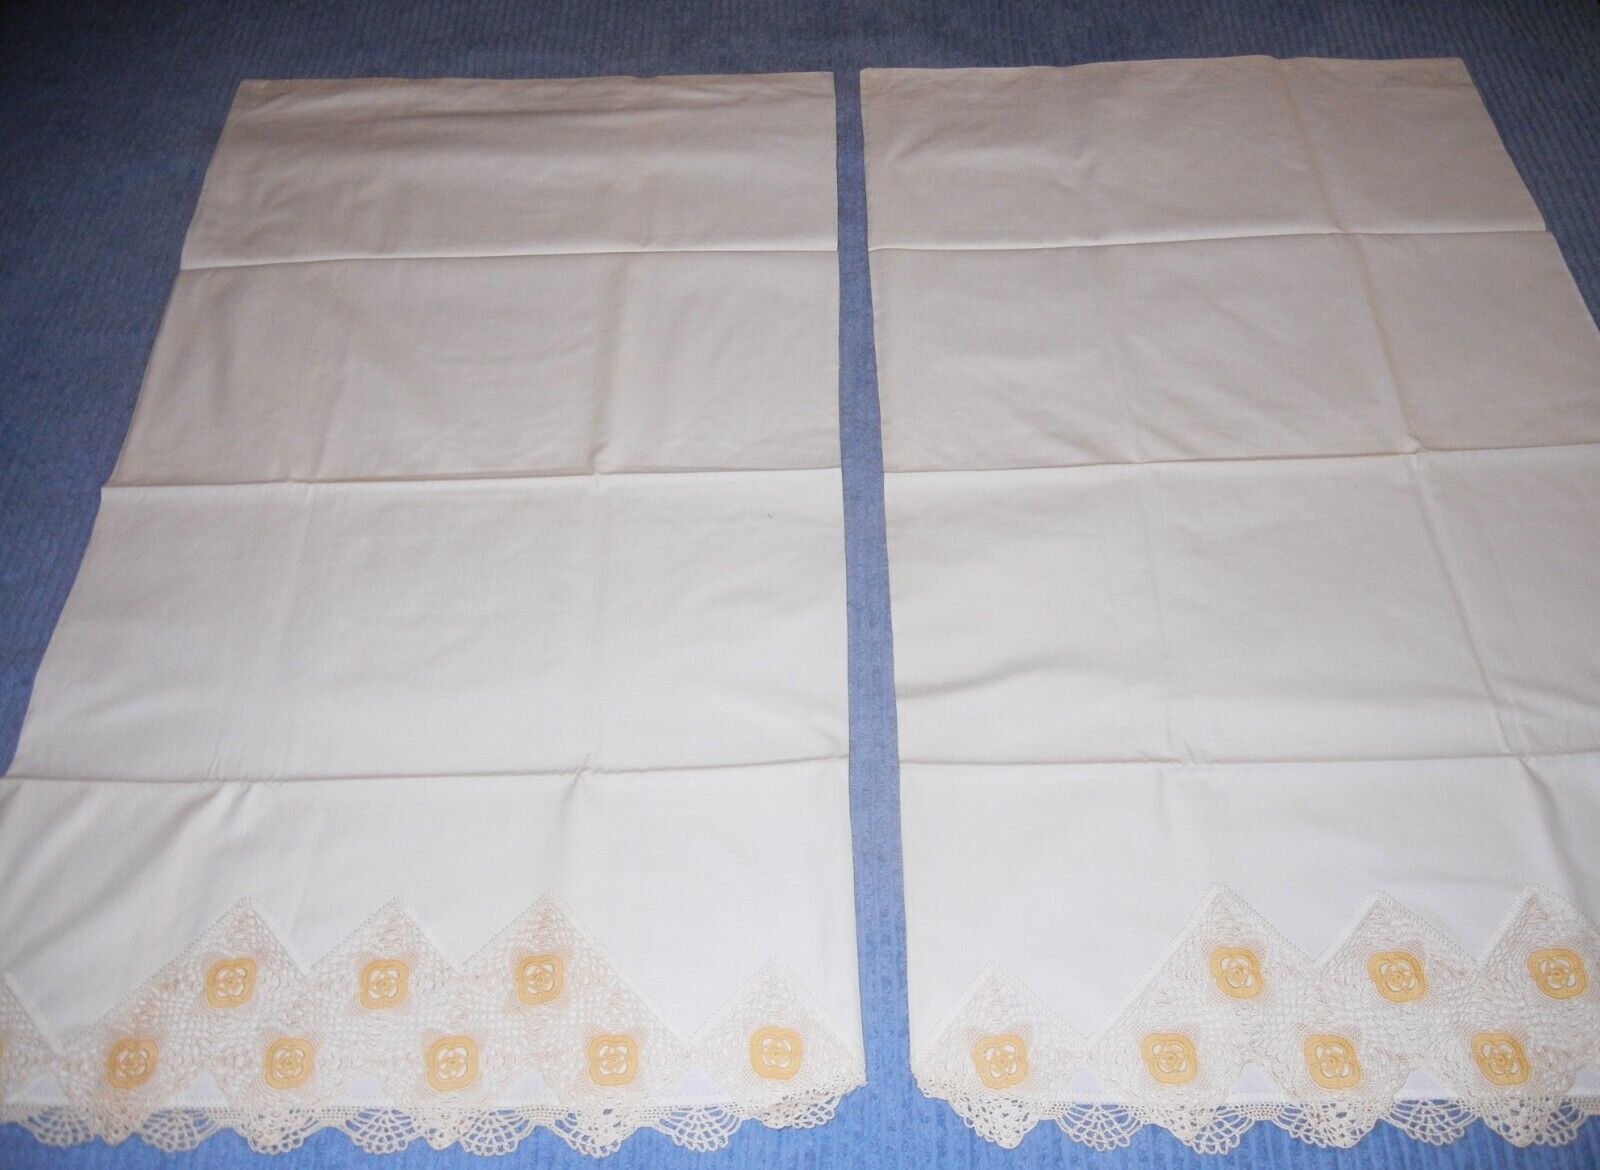 2 Matching Vintage Linen  Pillowcases with Yellow Gold Handcrocheted Trim